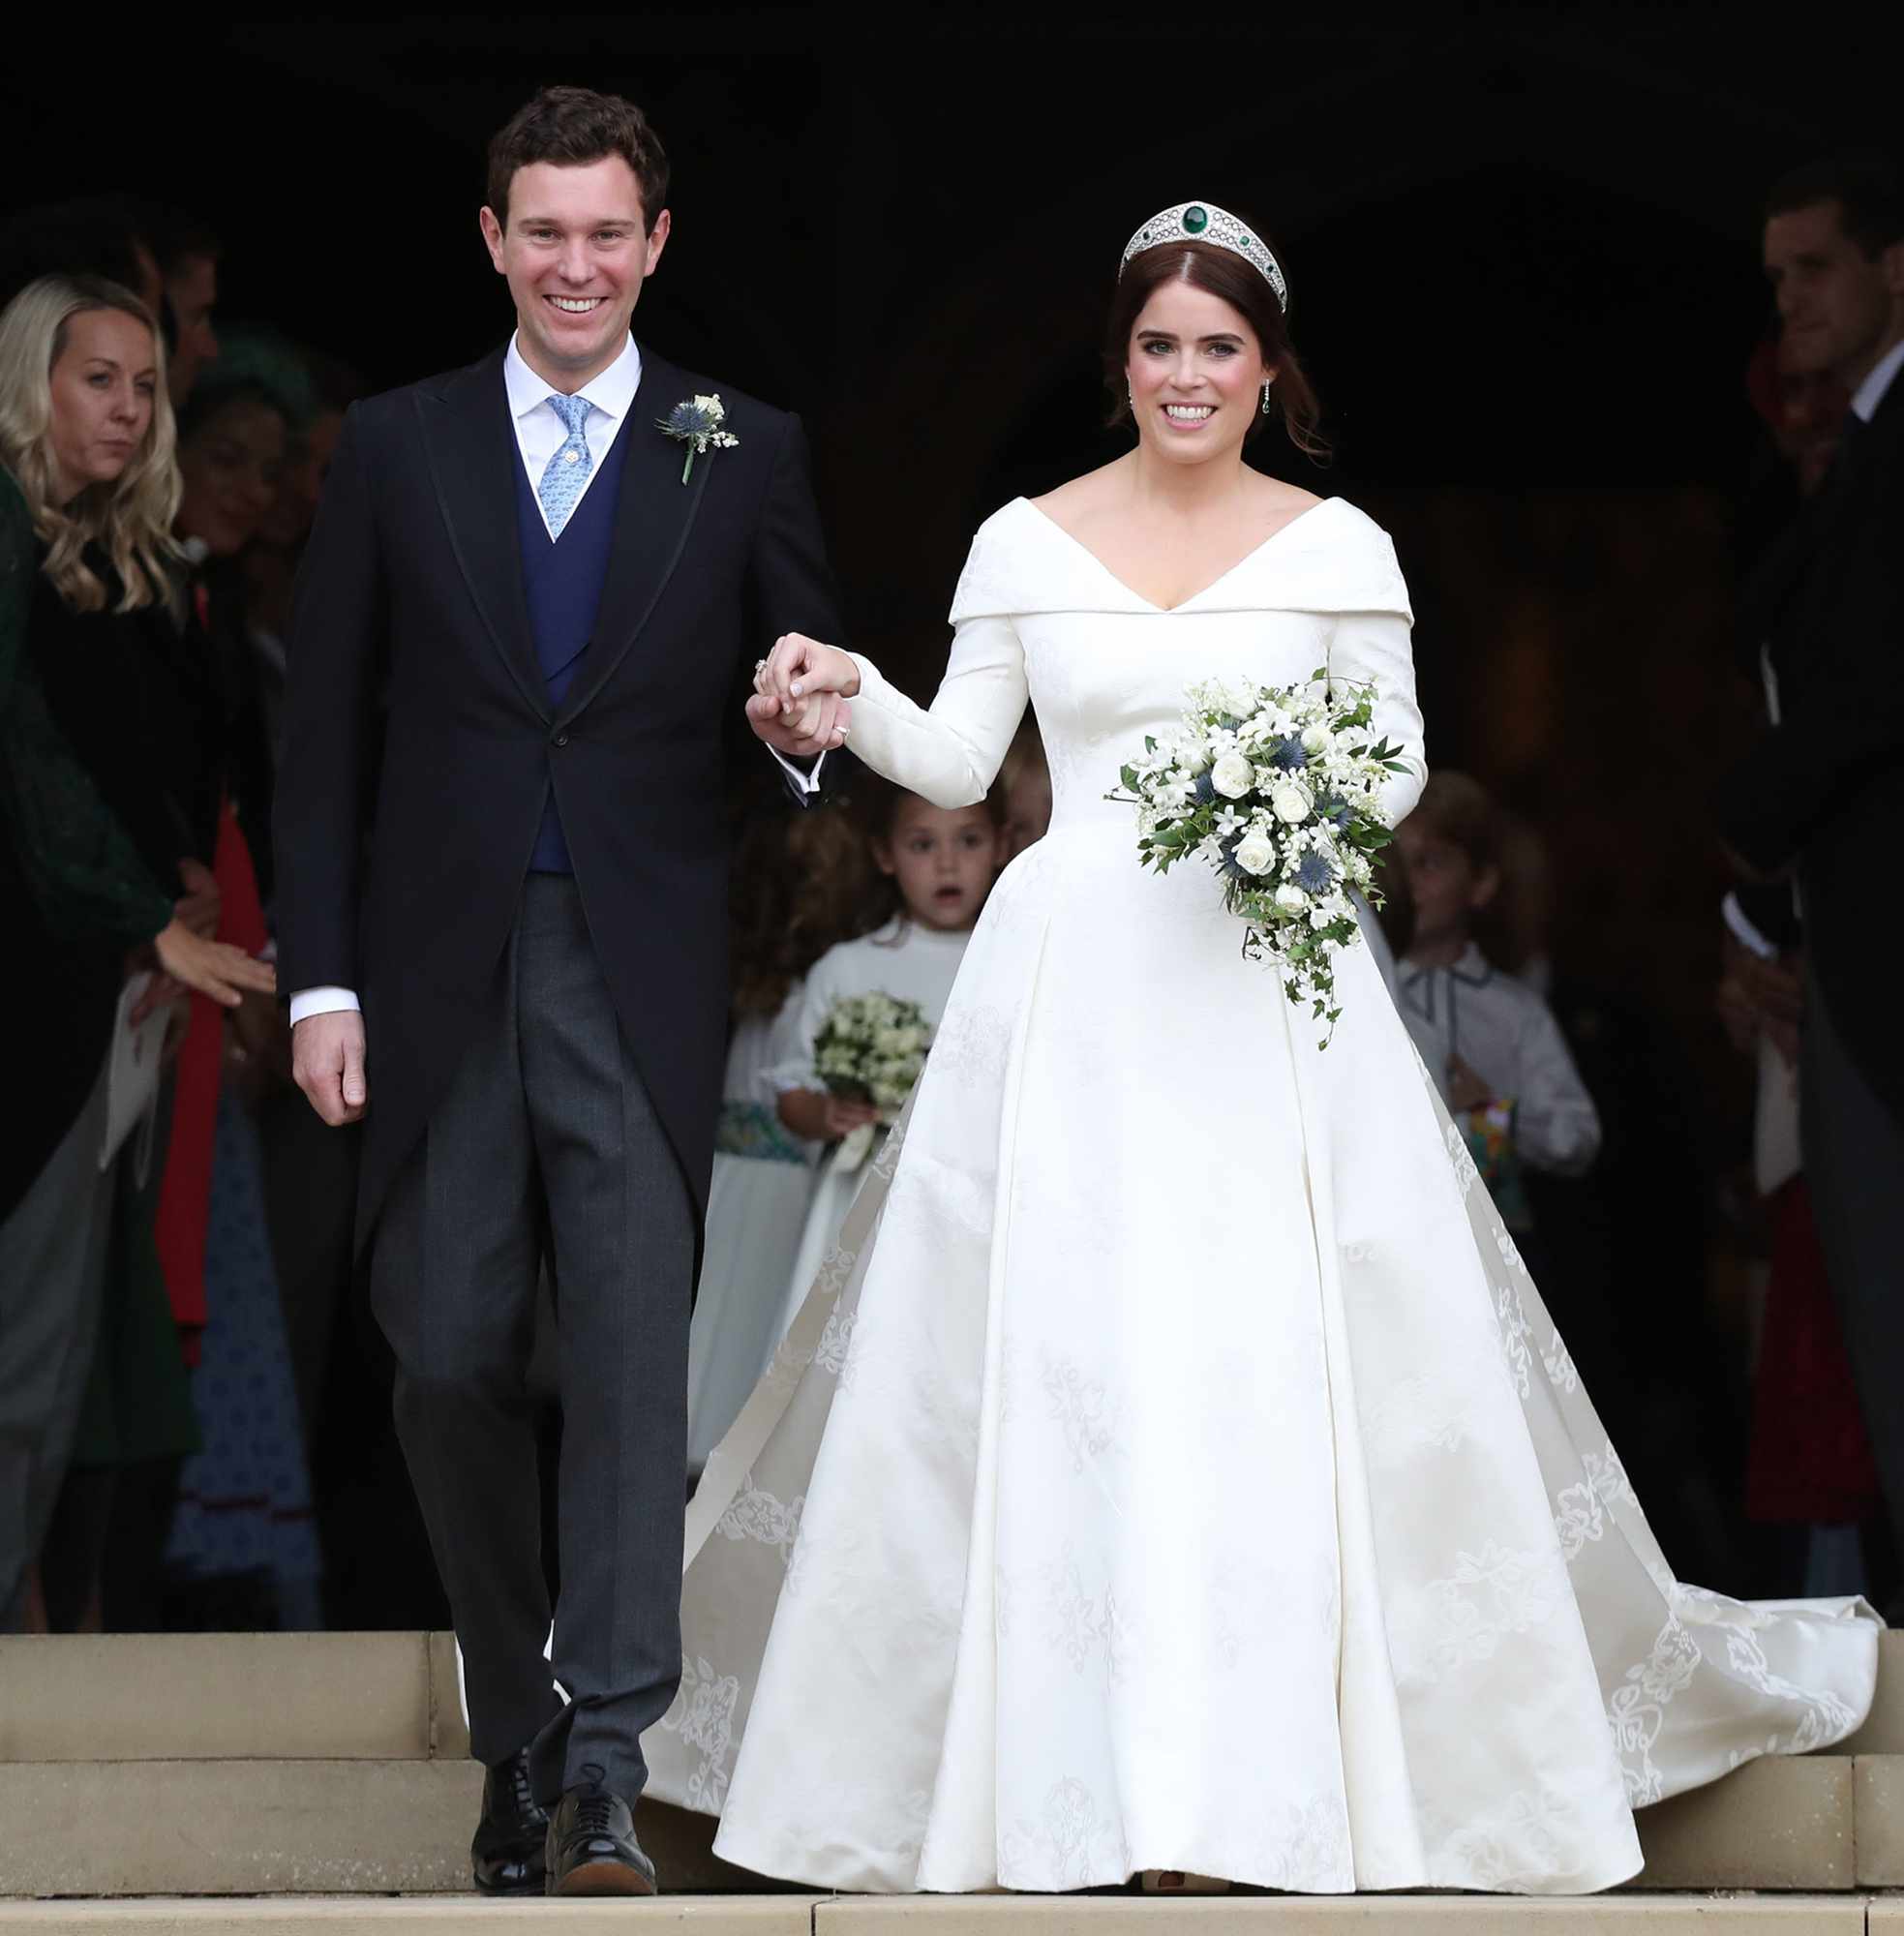 Princess Eugenie of York and her husband Jack Brooksbank on the steps of St George's Chapel after their wedding at St. George's Chapel on October 12, 2018 in Windsor, England